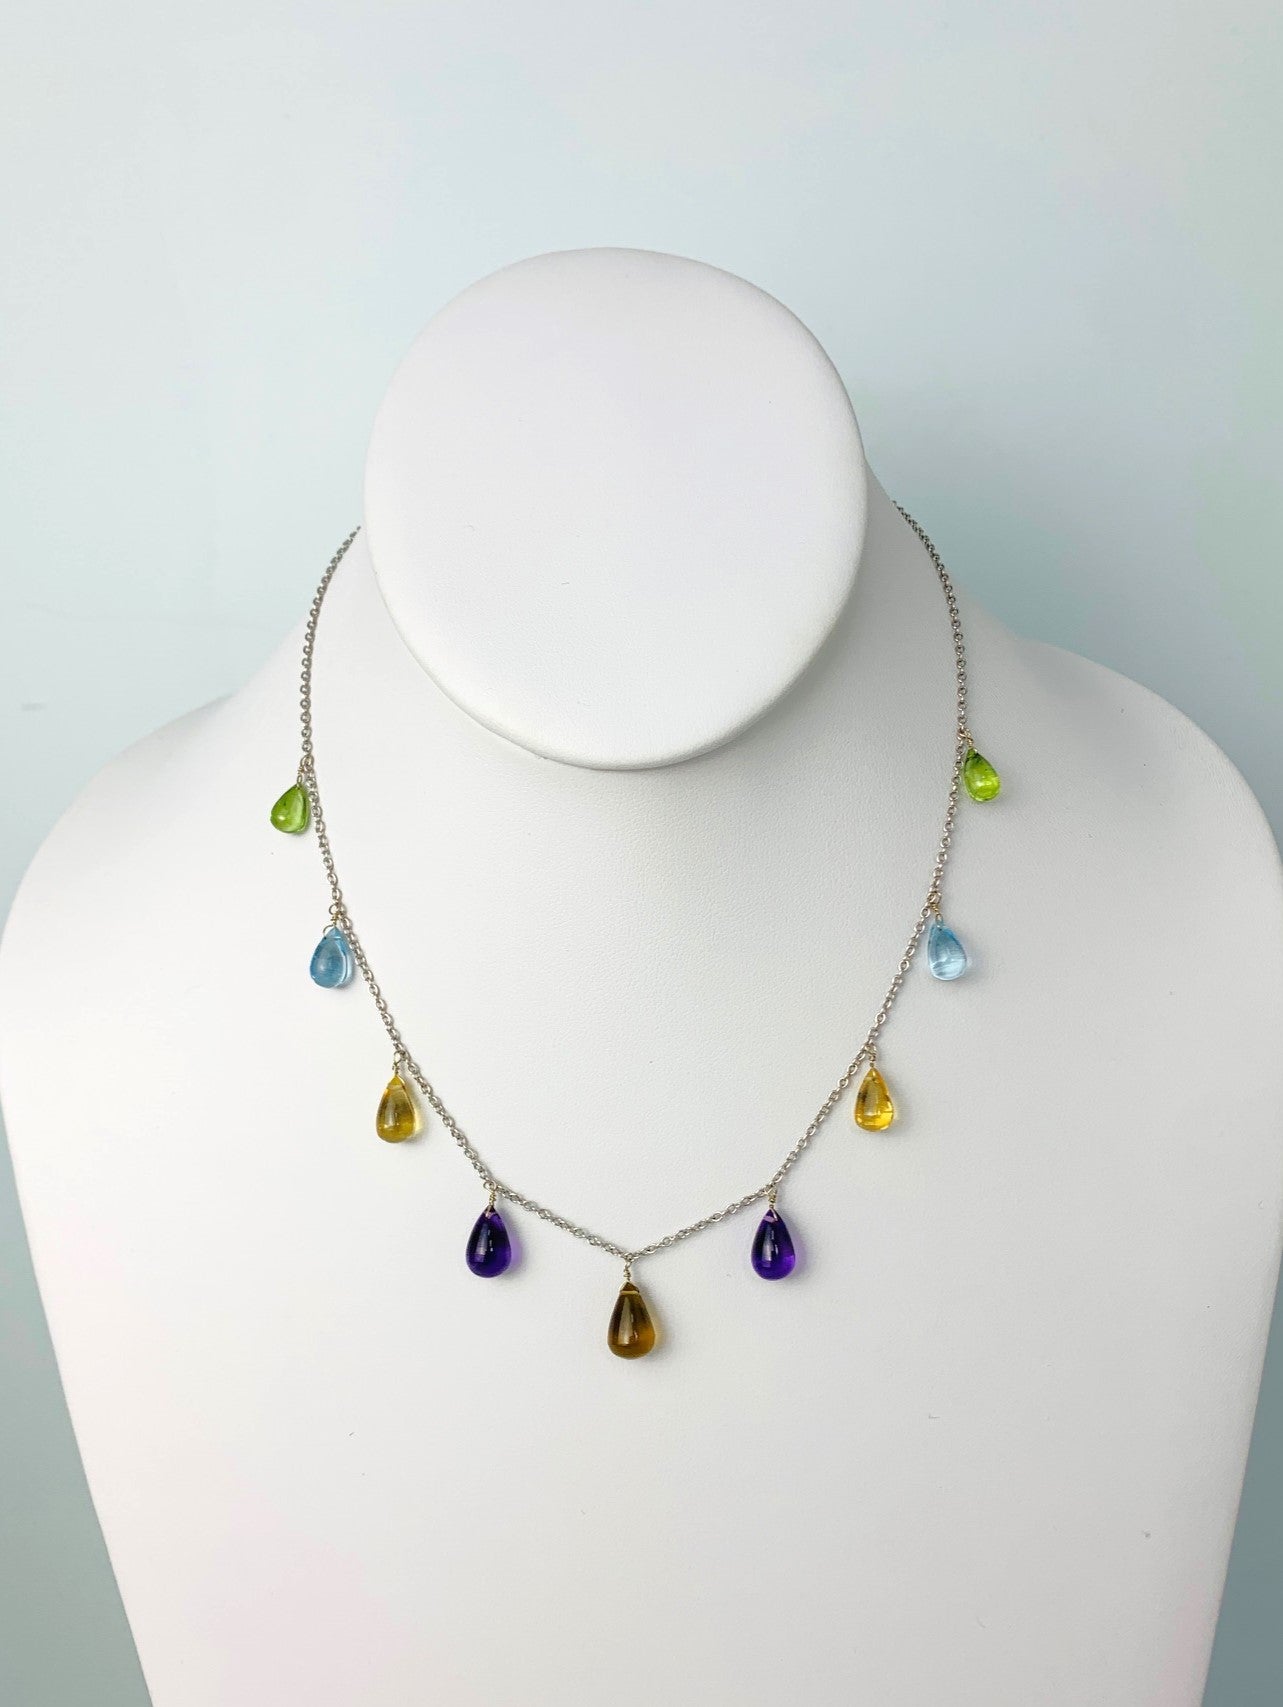 16"-17" Multicolored Gemstone 9 Station Dangly Necklace in 14KW - NCK-618-DNGGM14W-MLTI-17